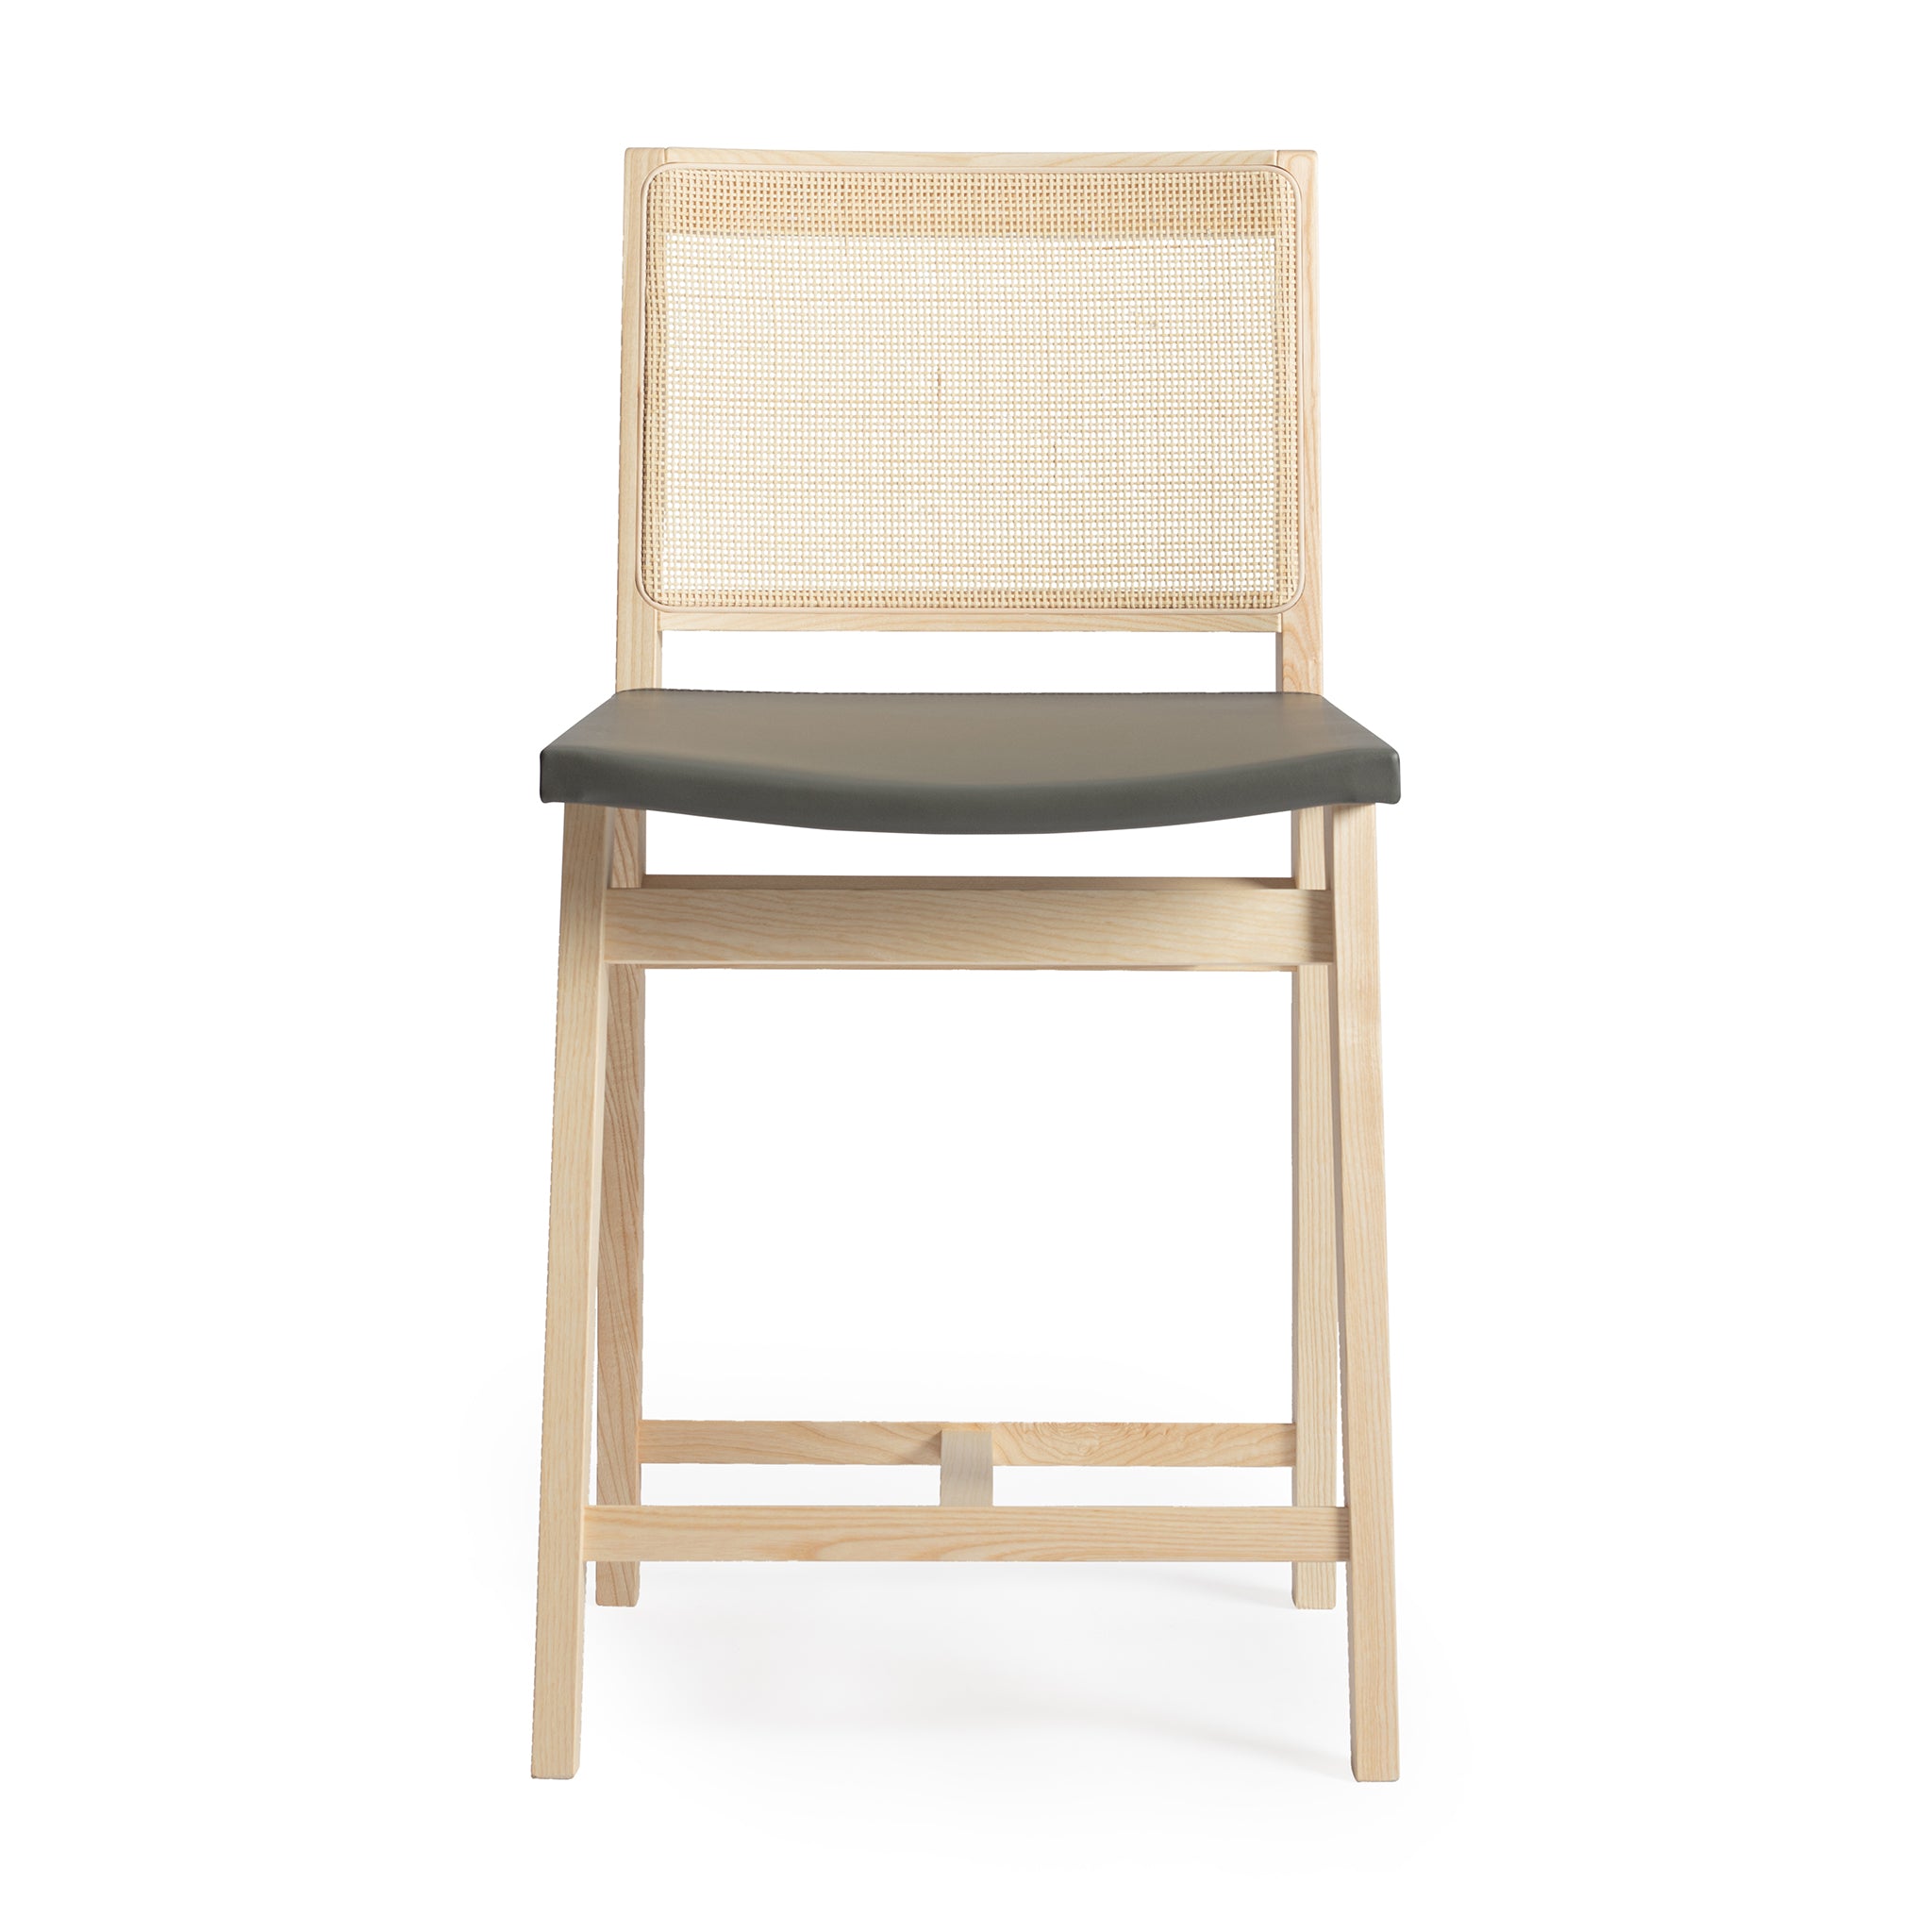 Front view of an Elye modern kitchen counter stool, natural ash frame, square weave cane back, contract grade gray leather seat, produced by Klarel in Italy. #K43-3